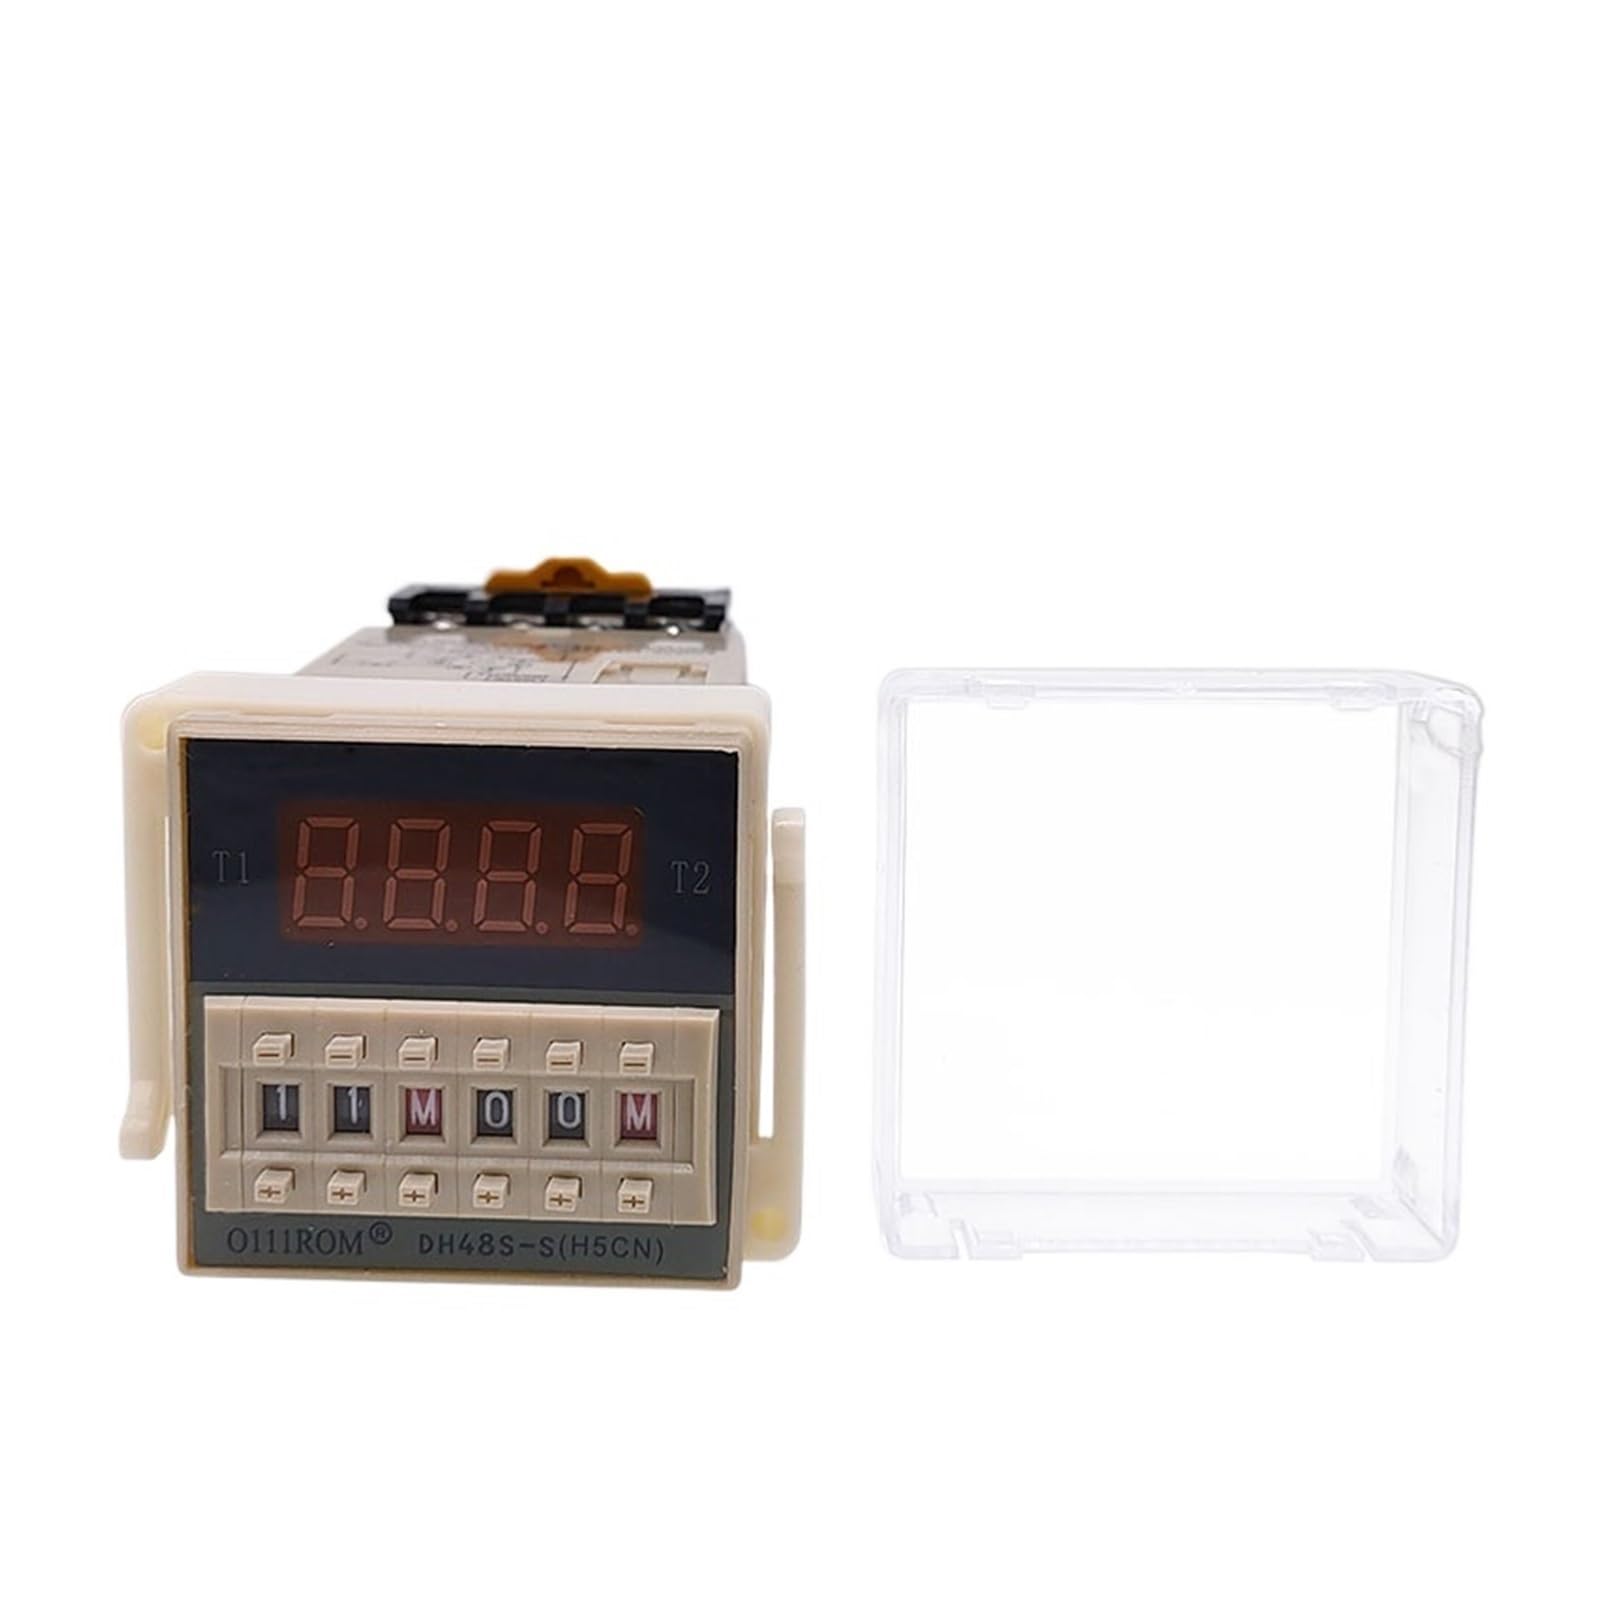 DH48S-S Digital Display Time Relay DH48S-1Z Cycle Timer Control and Delay Device With Base DH48S-2Z NWPNLXEA(DH48S-1Z 12V) von NWPNLXEA